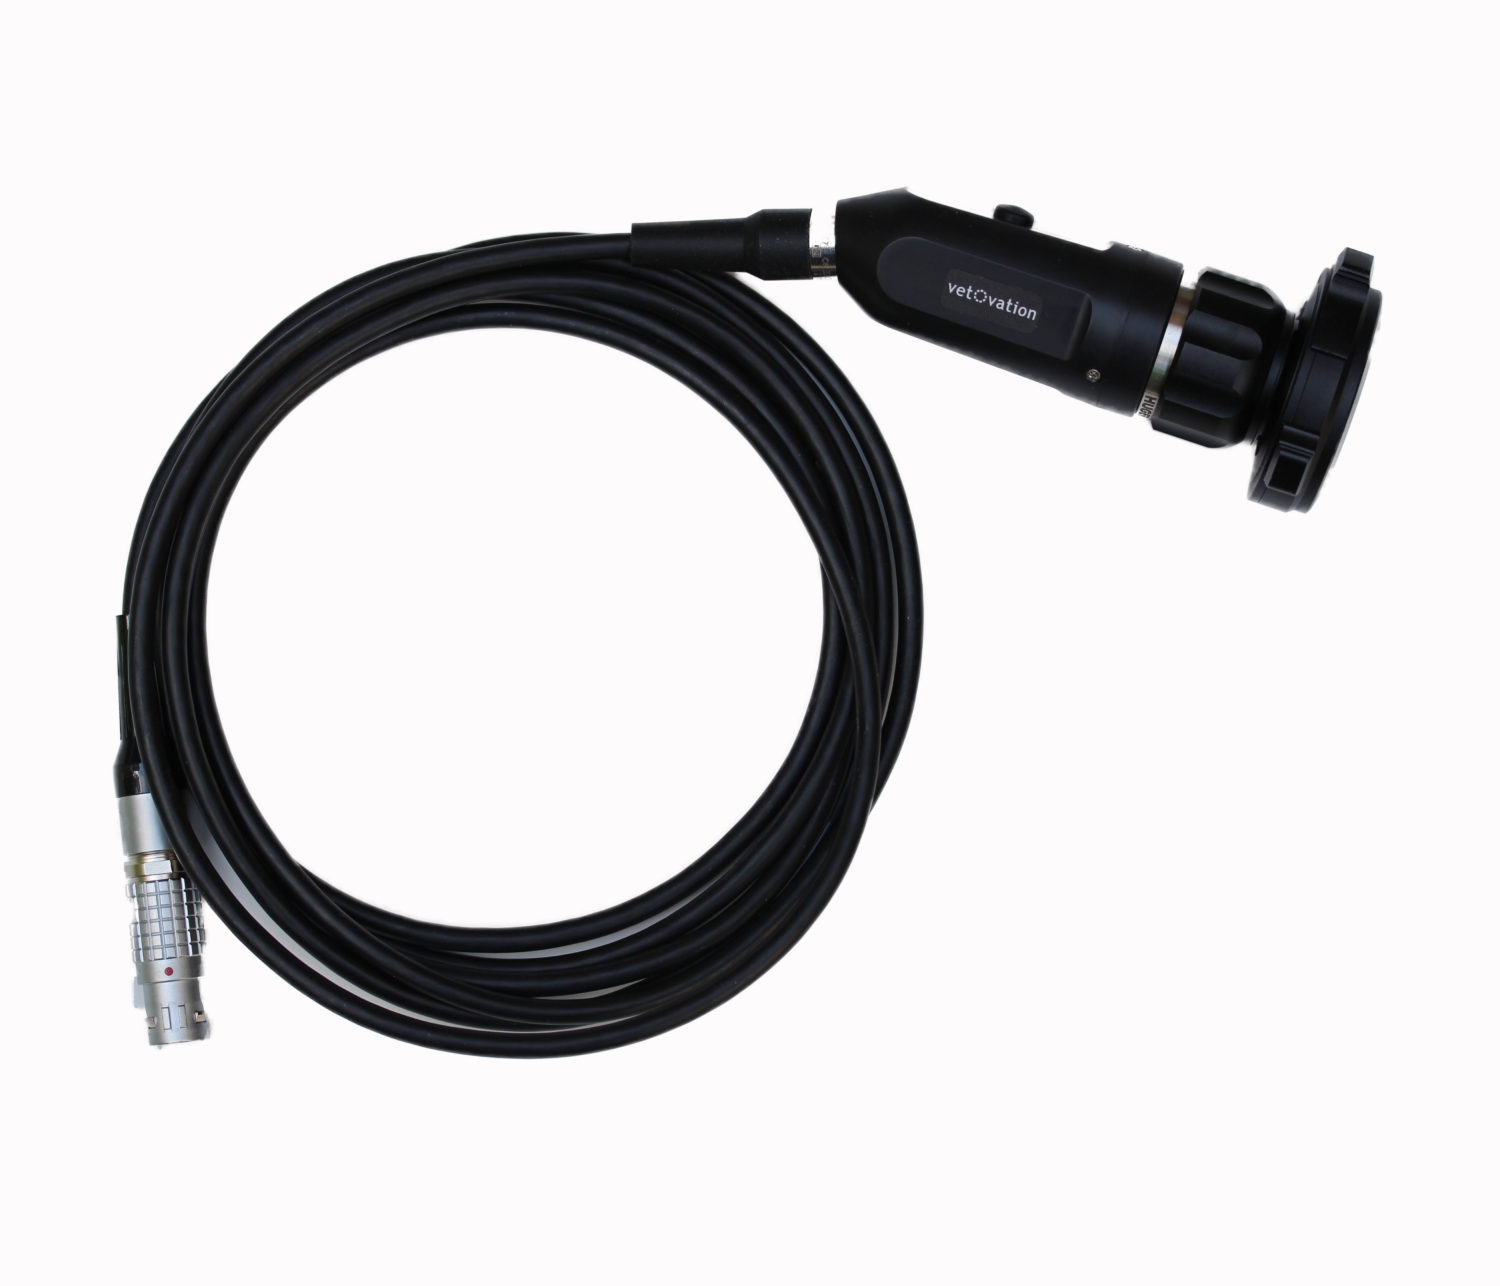 Endoscope camera head - EndoView - WISAP Medical Technology - medical /  surgical / digital